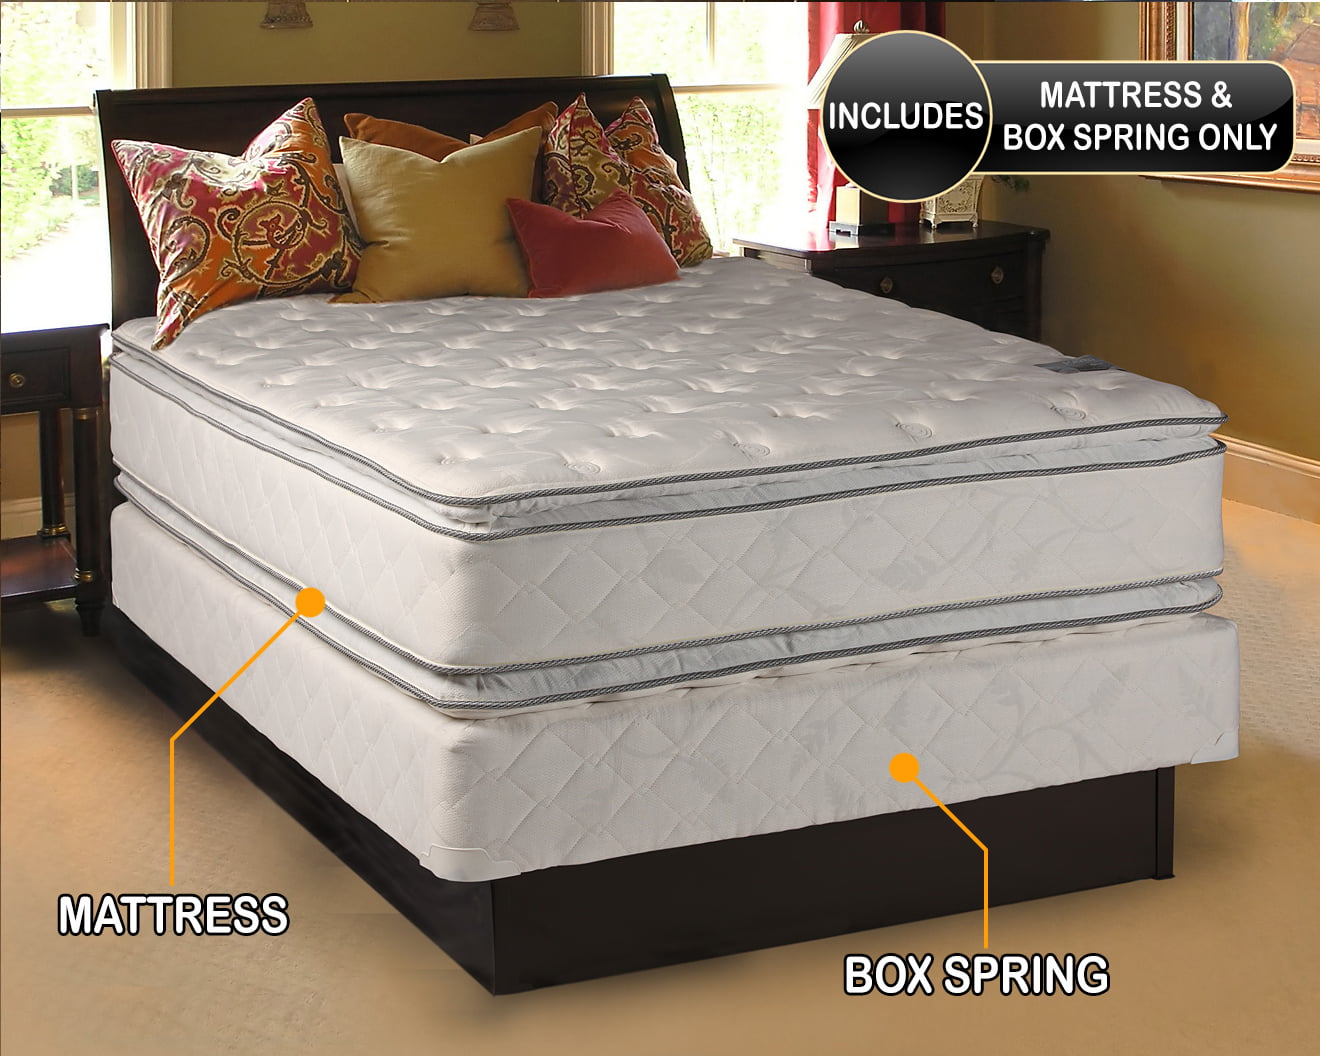 queen size mattress and box springs set